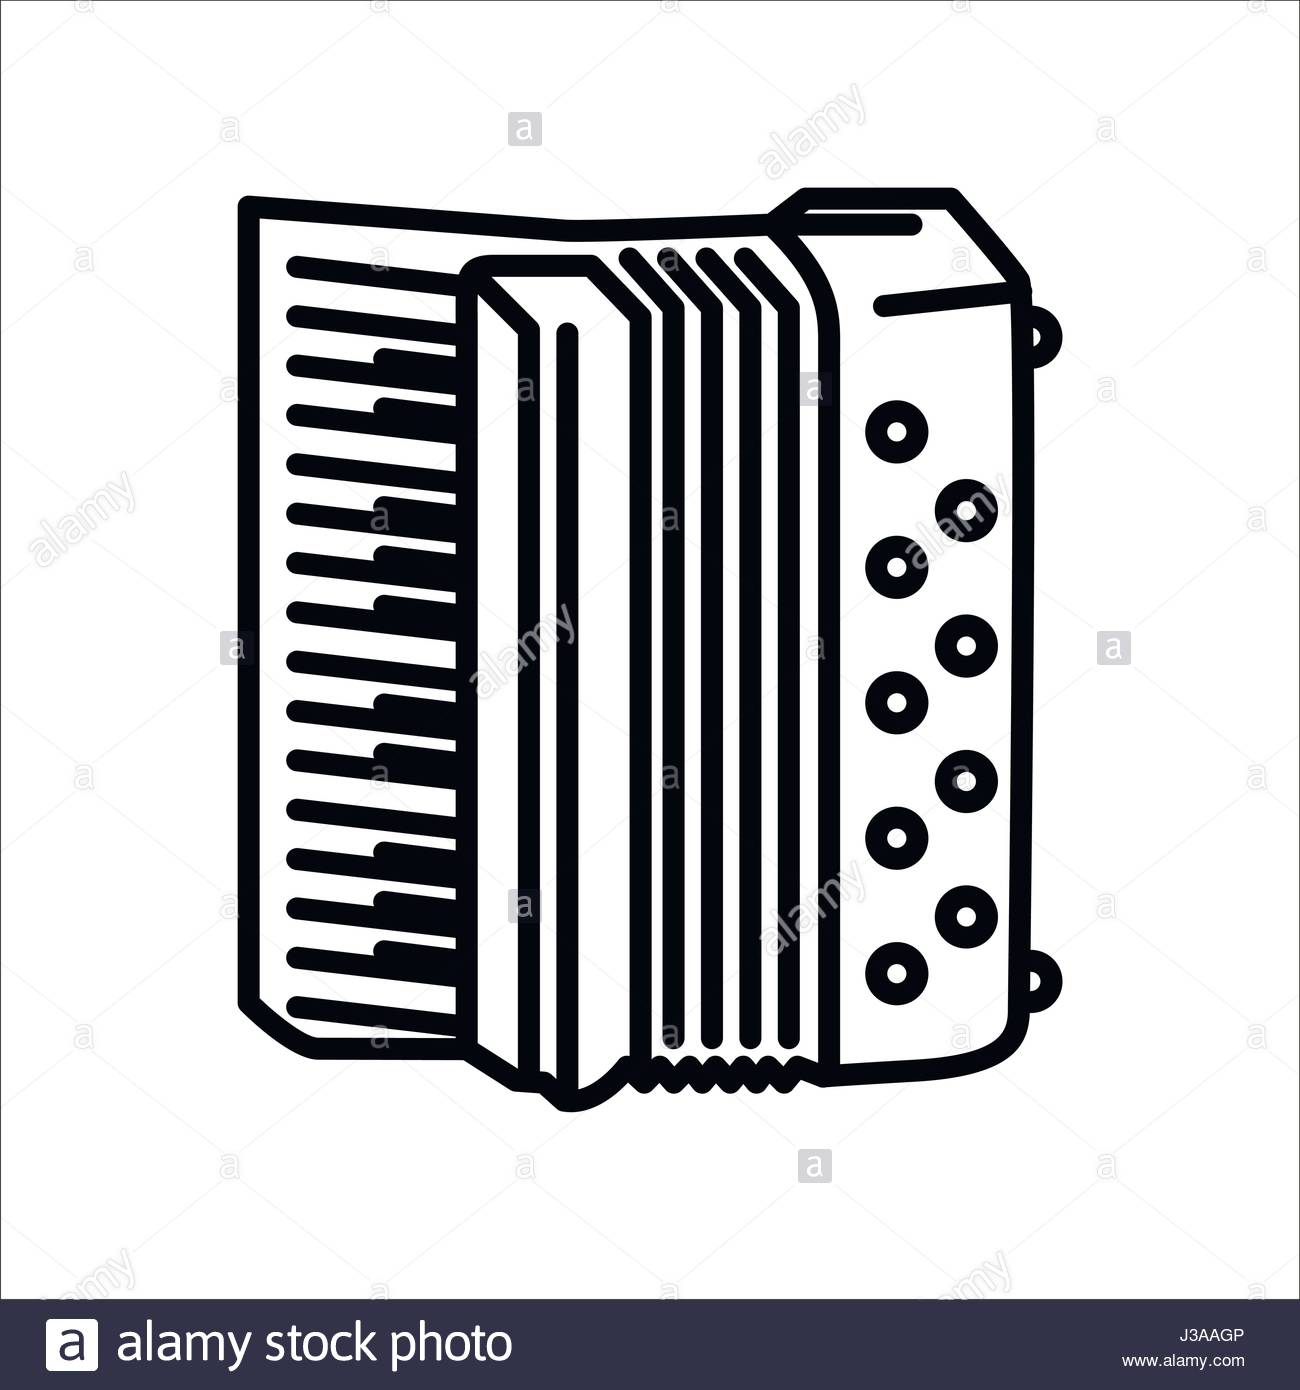 Accordion Drawing Stock Photos & Accordion Drawing Stock Images - Alamy